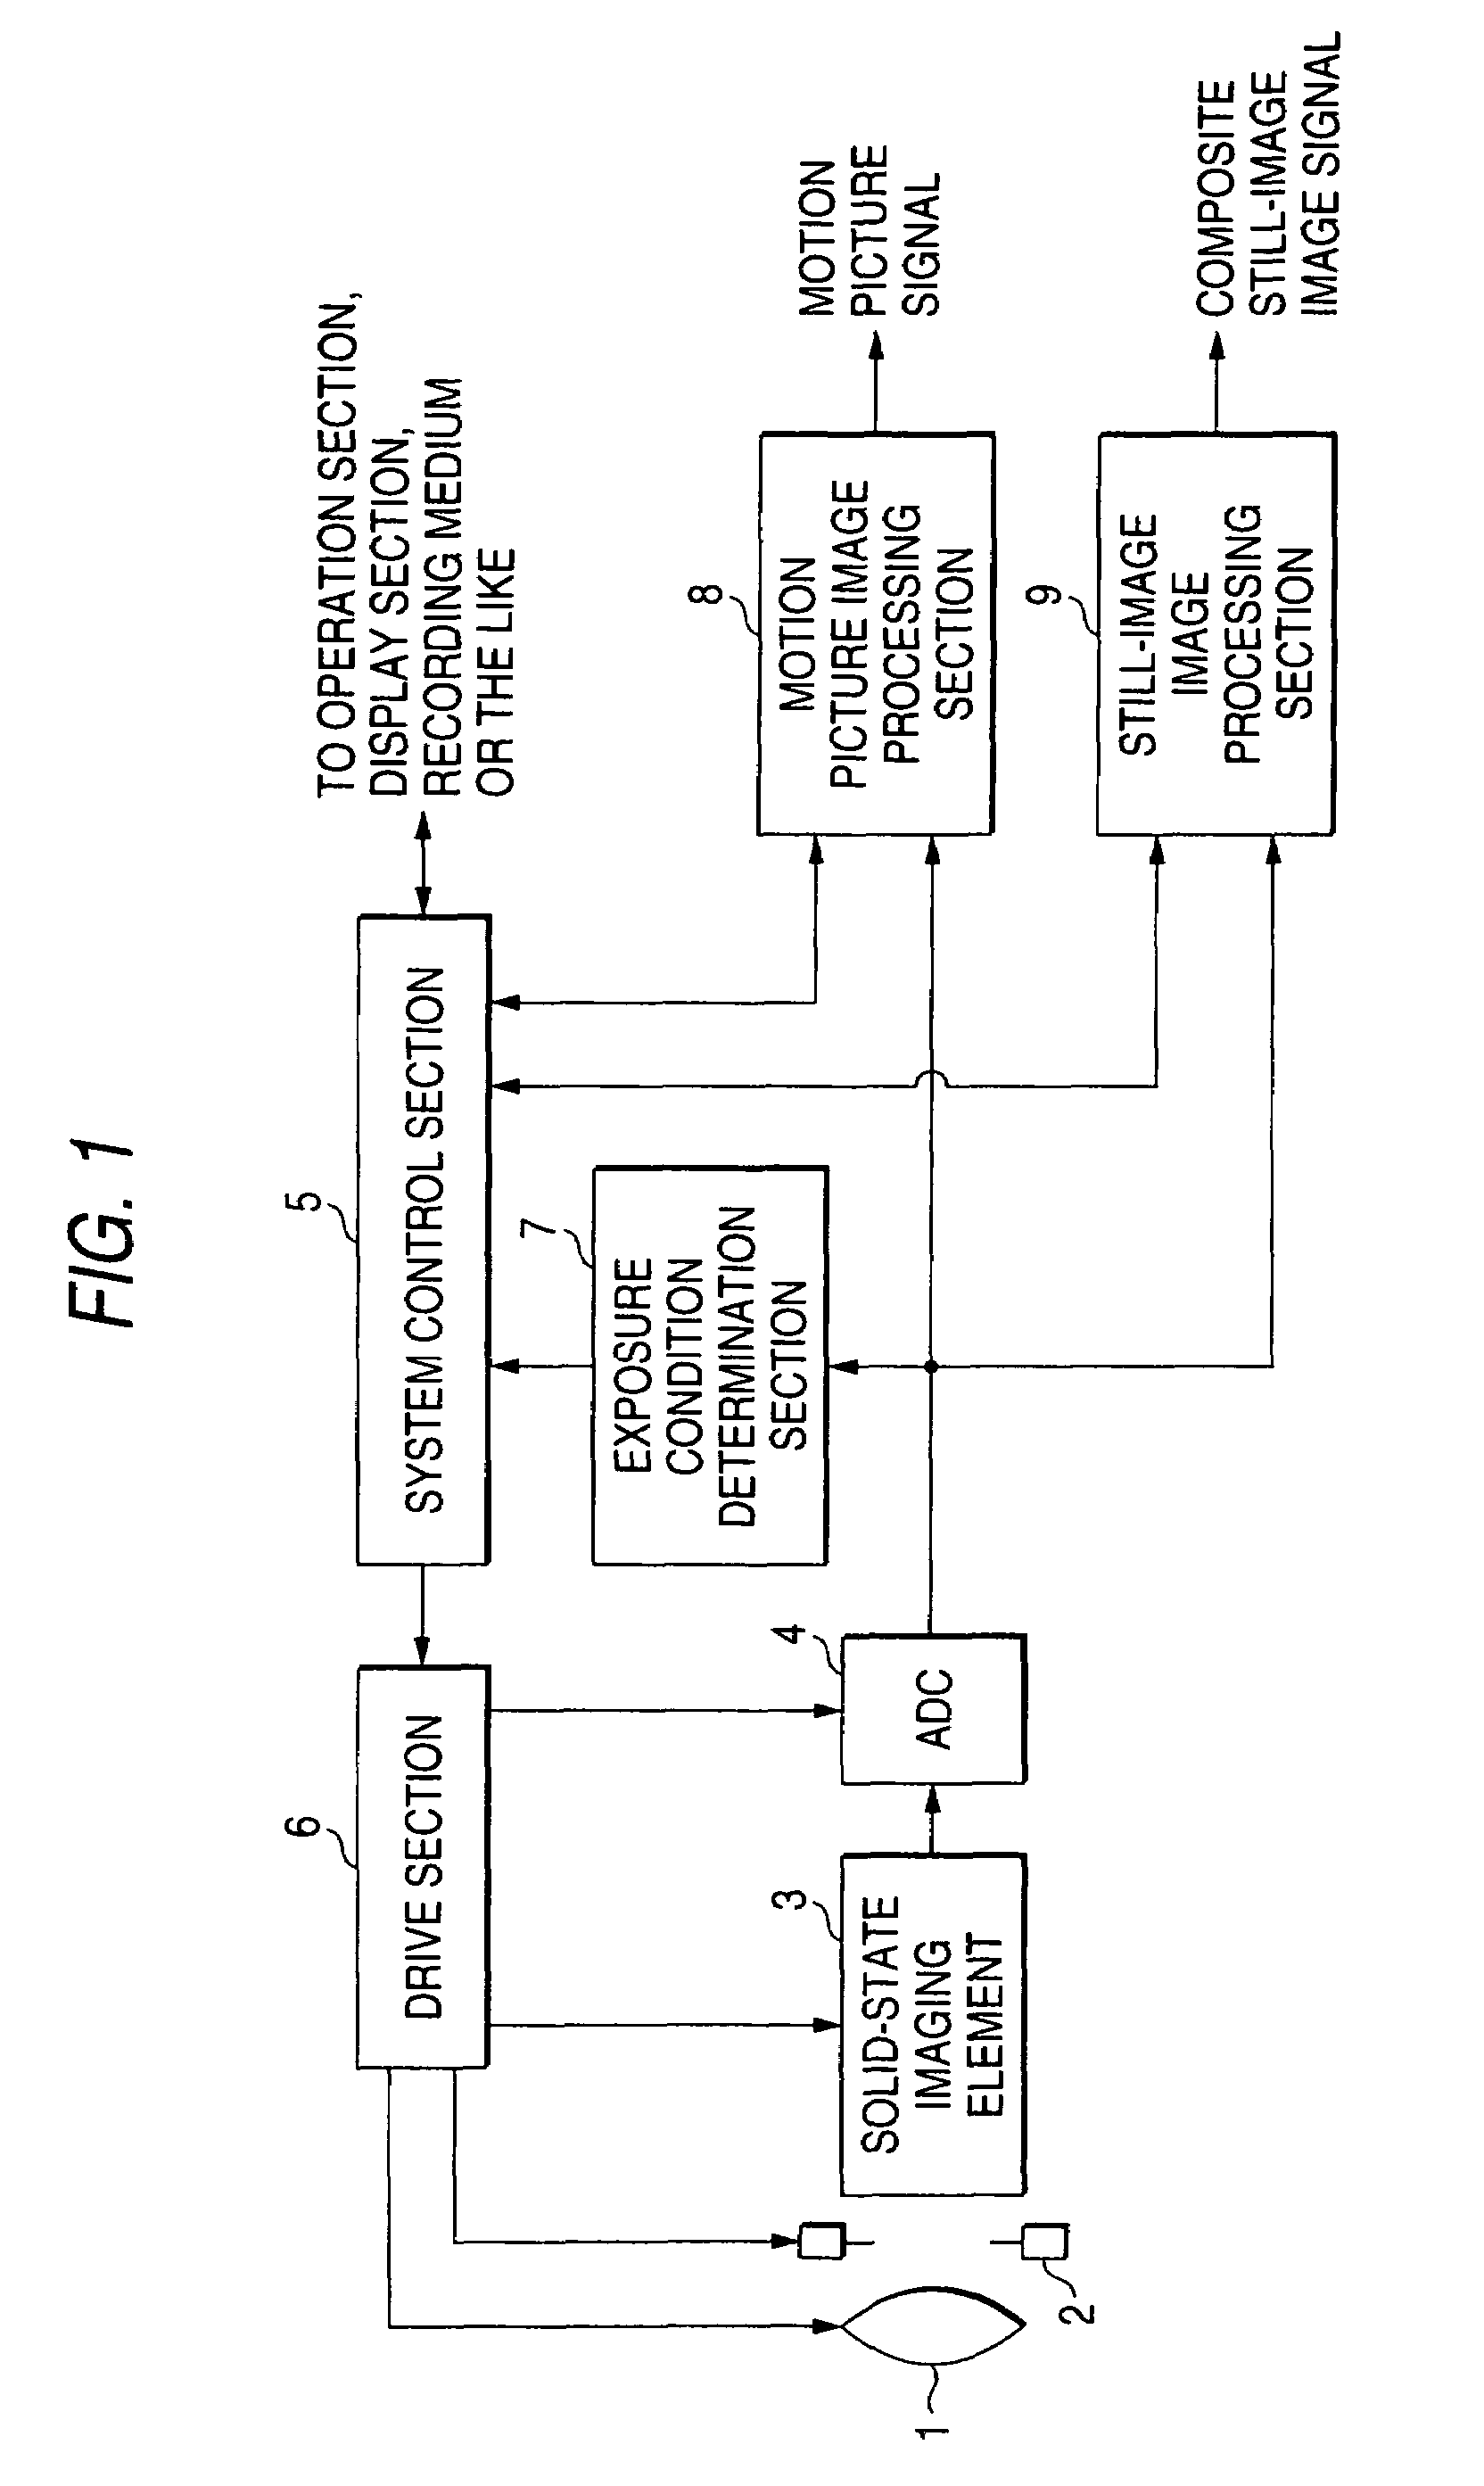 Method, imaging device and camera for producing composite image from merged image signals